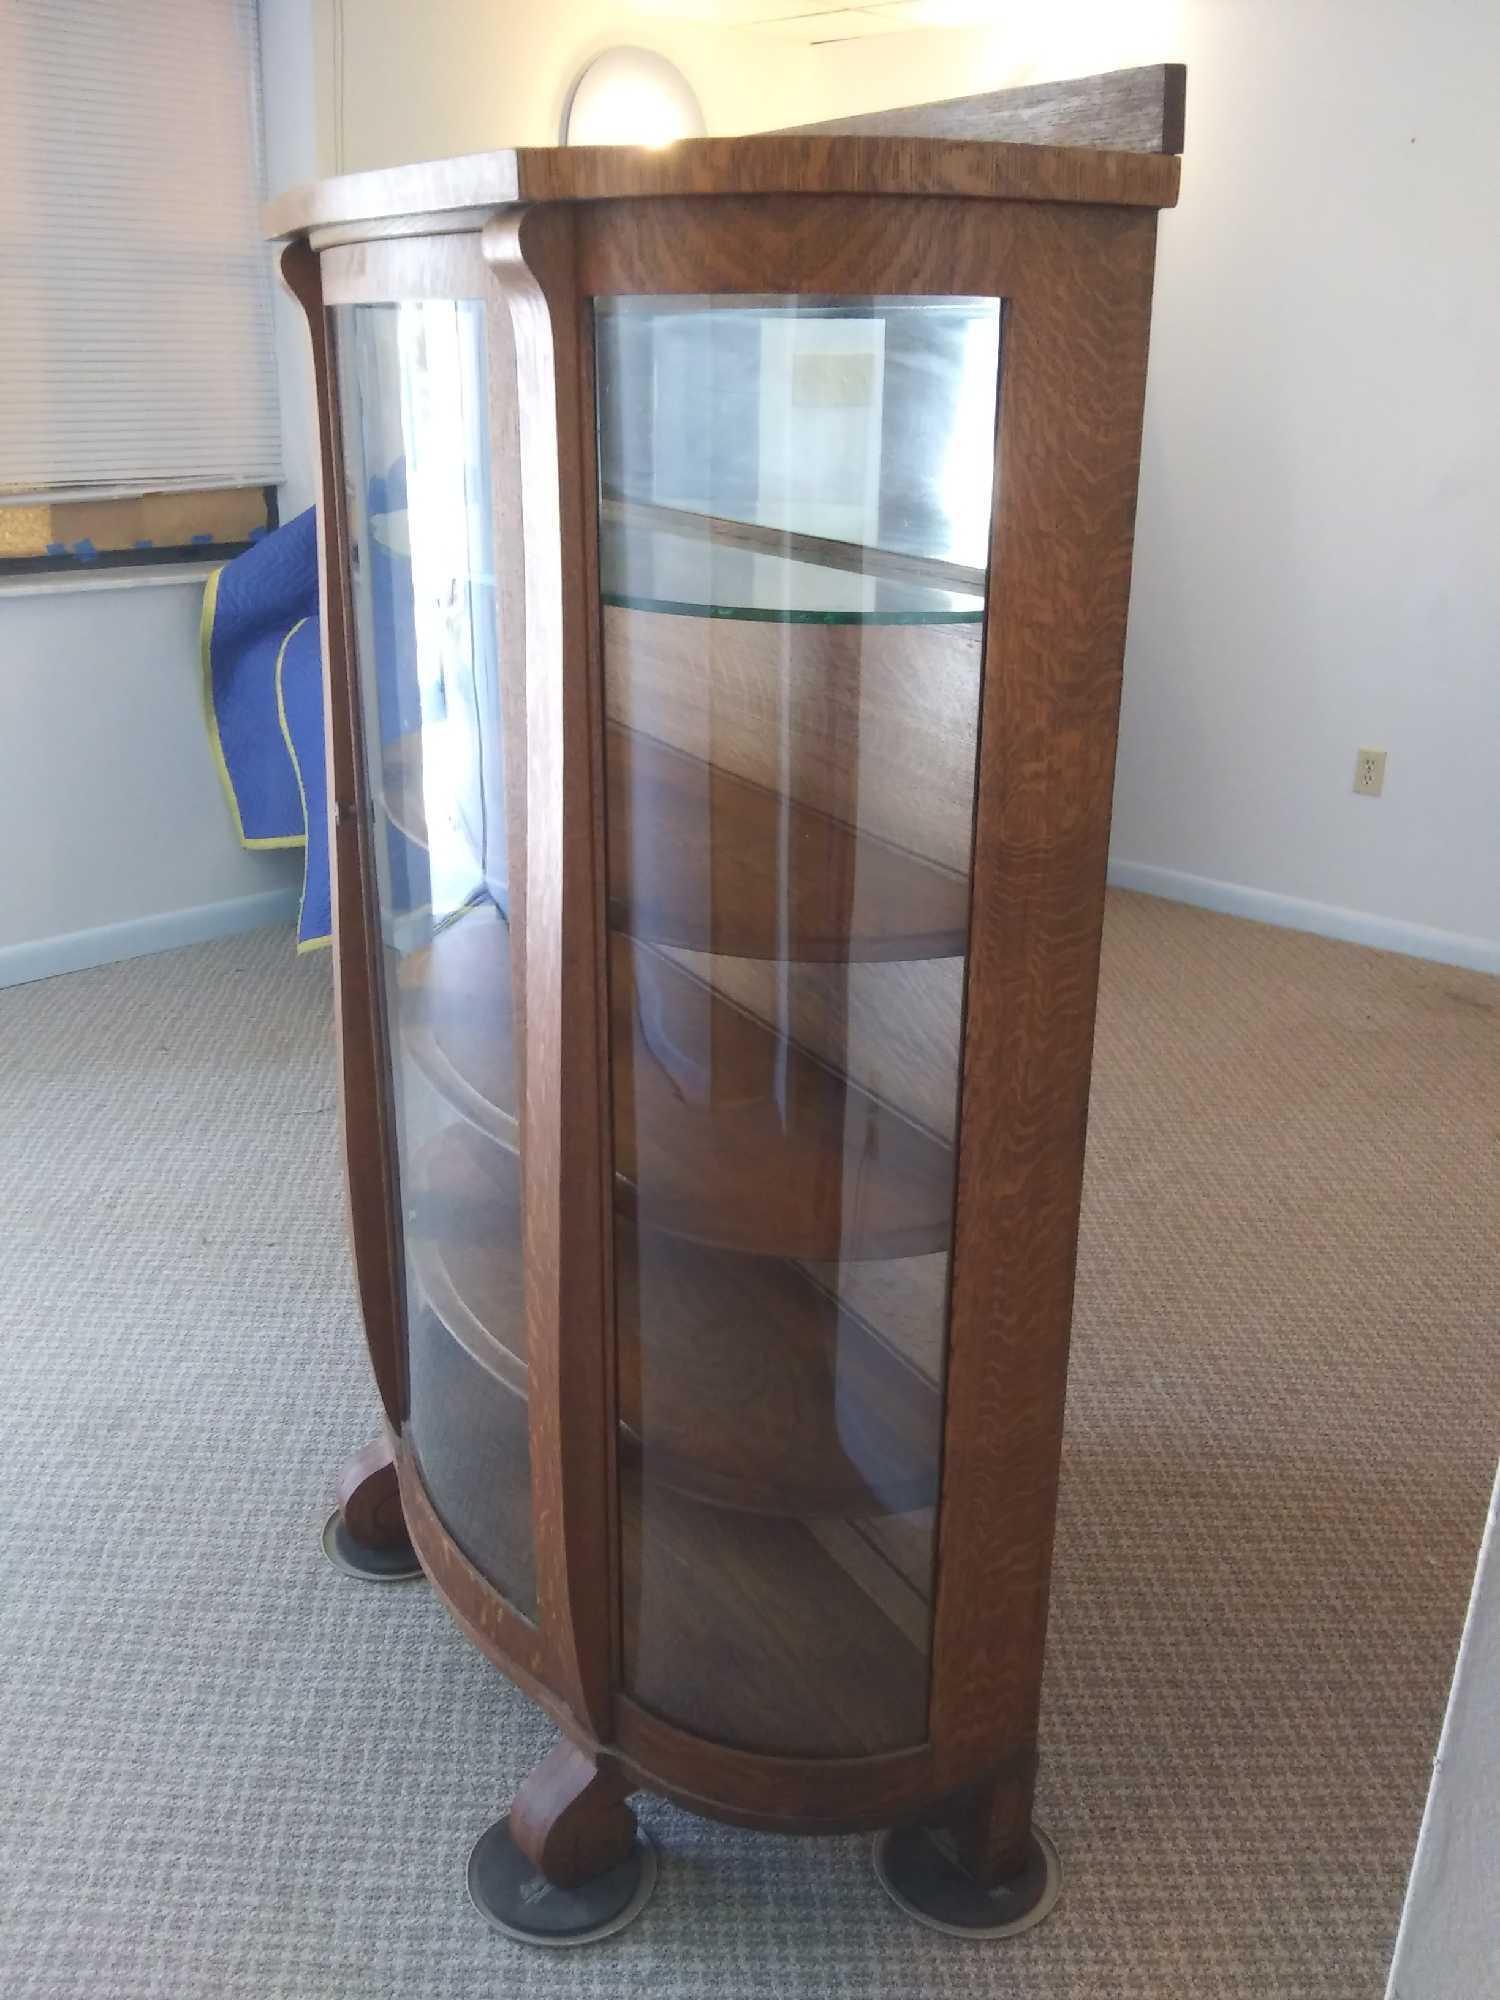 Gorgeous 5 Level Glass and Wood Shelf Bow Front Lockland Curio